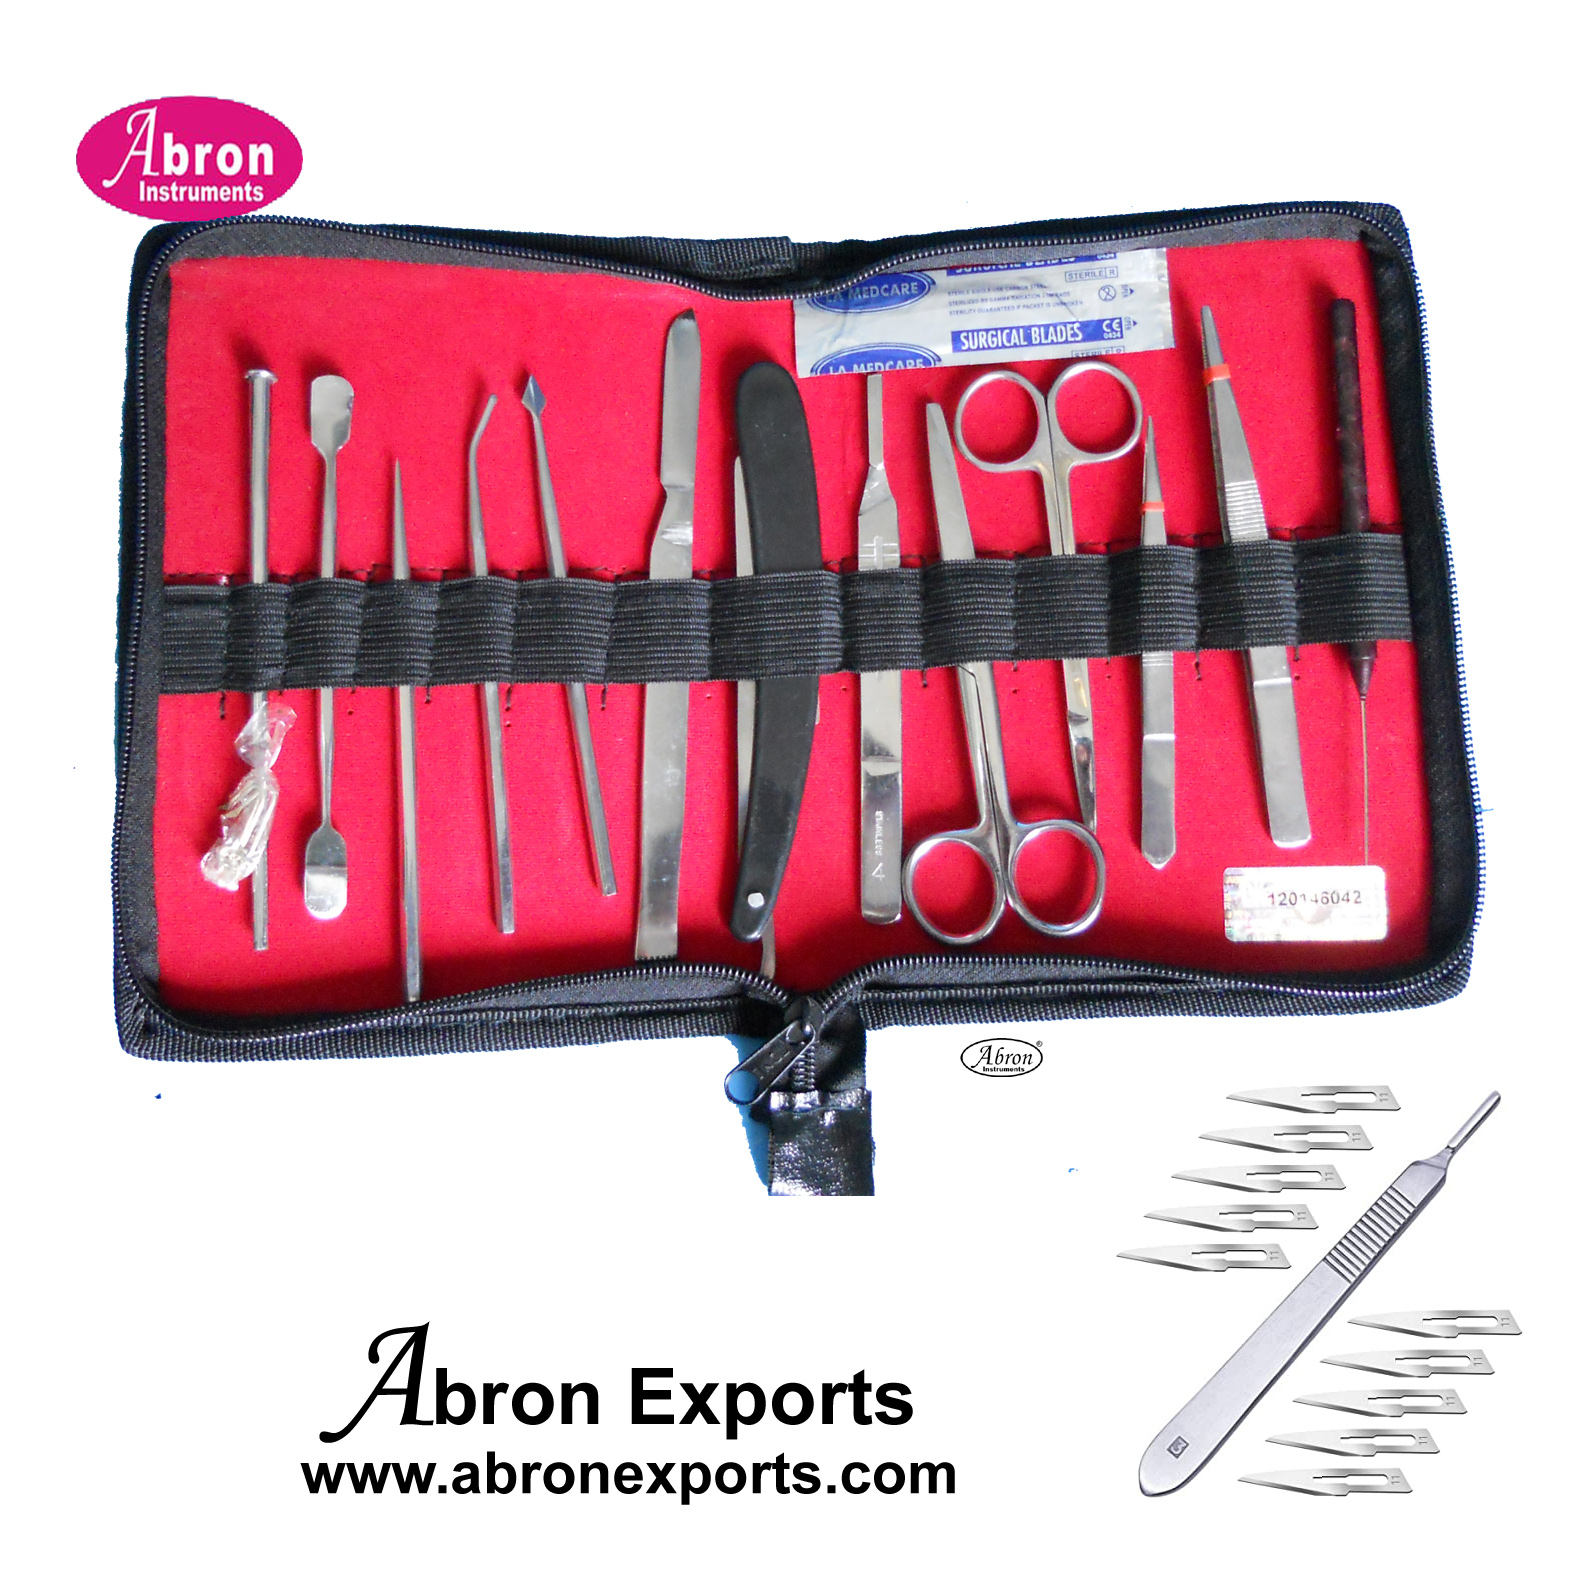 Dissection set dissecting instruments zip pouch 22inst anatomy biology medical veterinary scalpel razer forceps scissors Abron ABM-2557A22